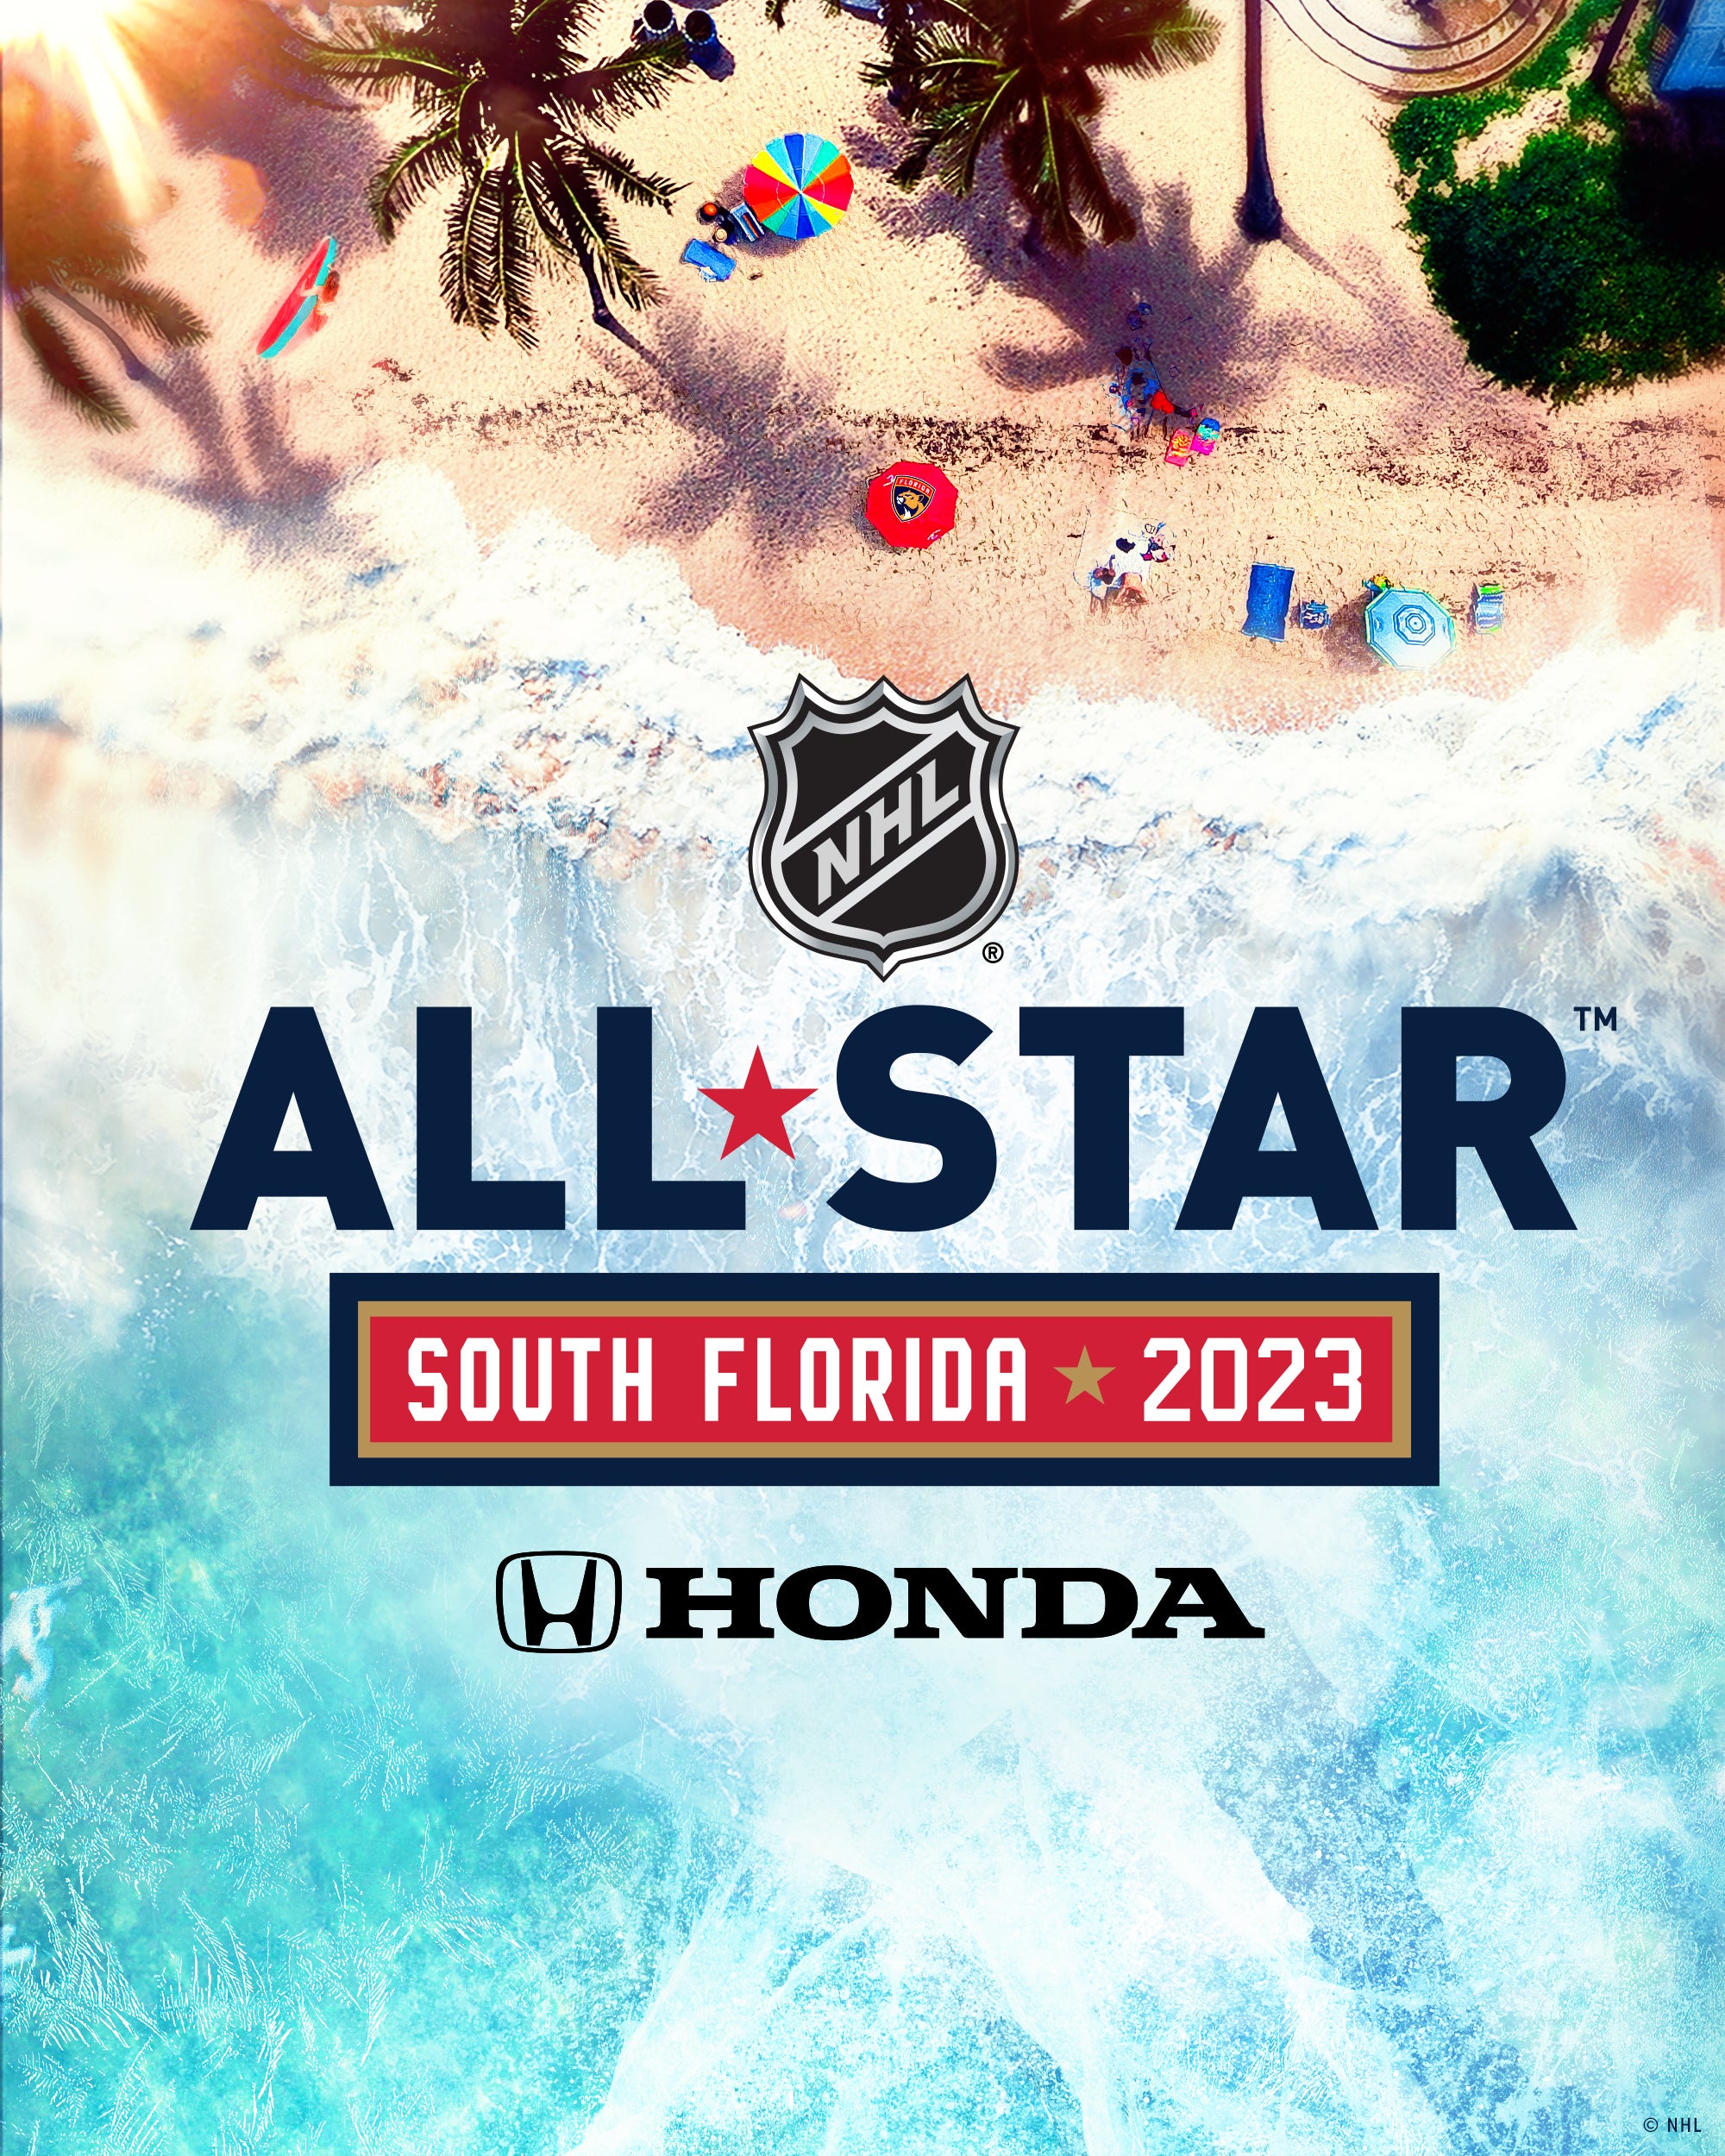 Florida Panthers get 2023 NHL All-Star Weekend in return to South Florida